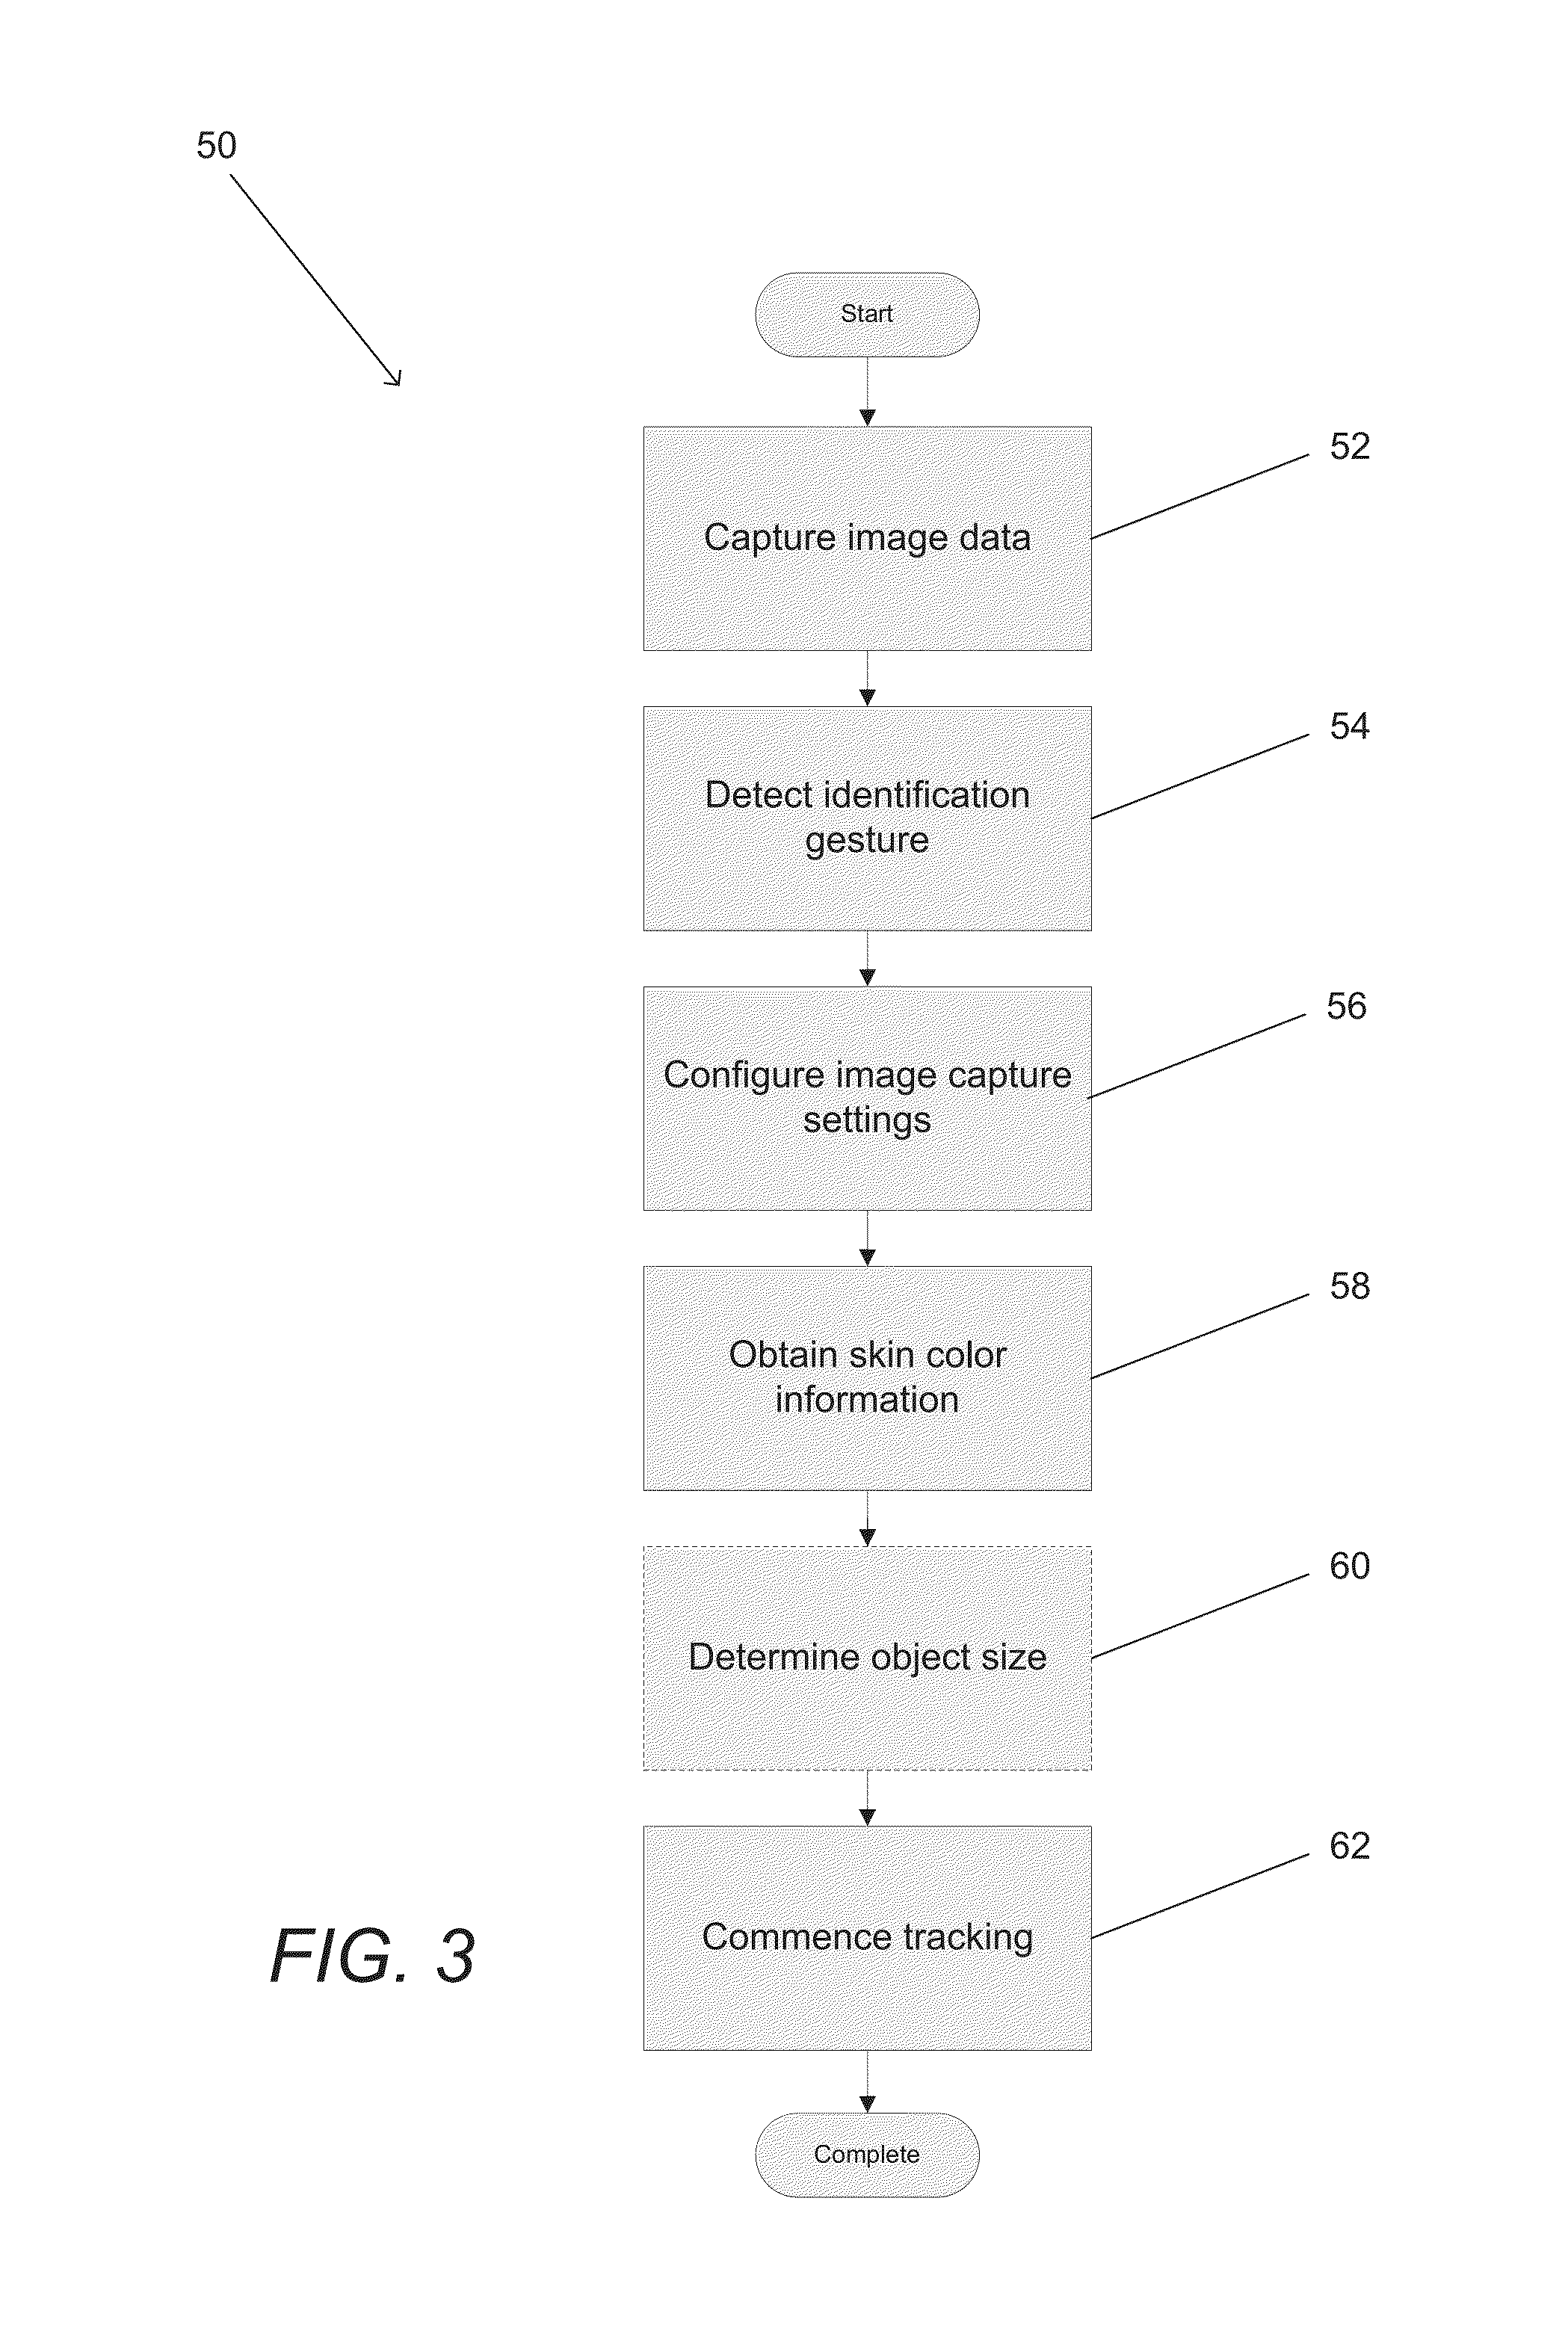 Systems and methods for initializing motion tracking of human hands